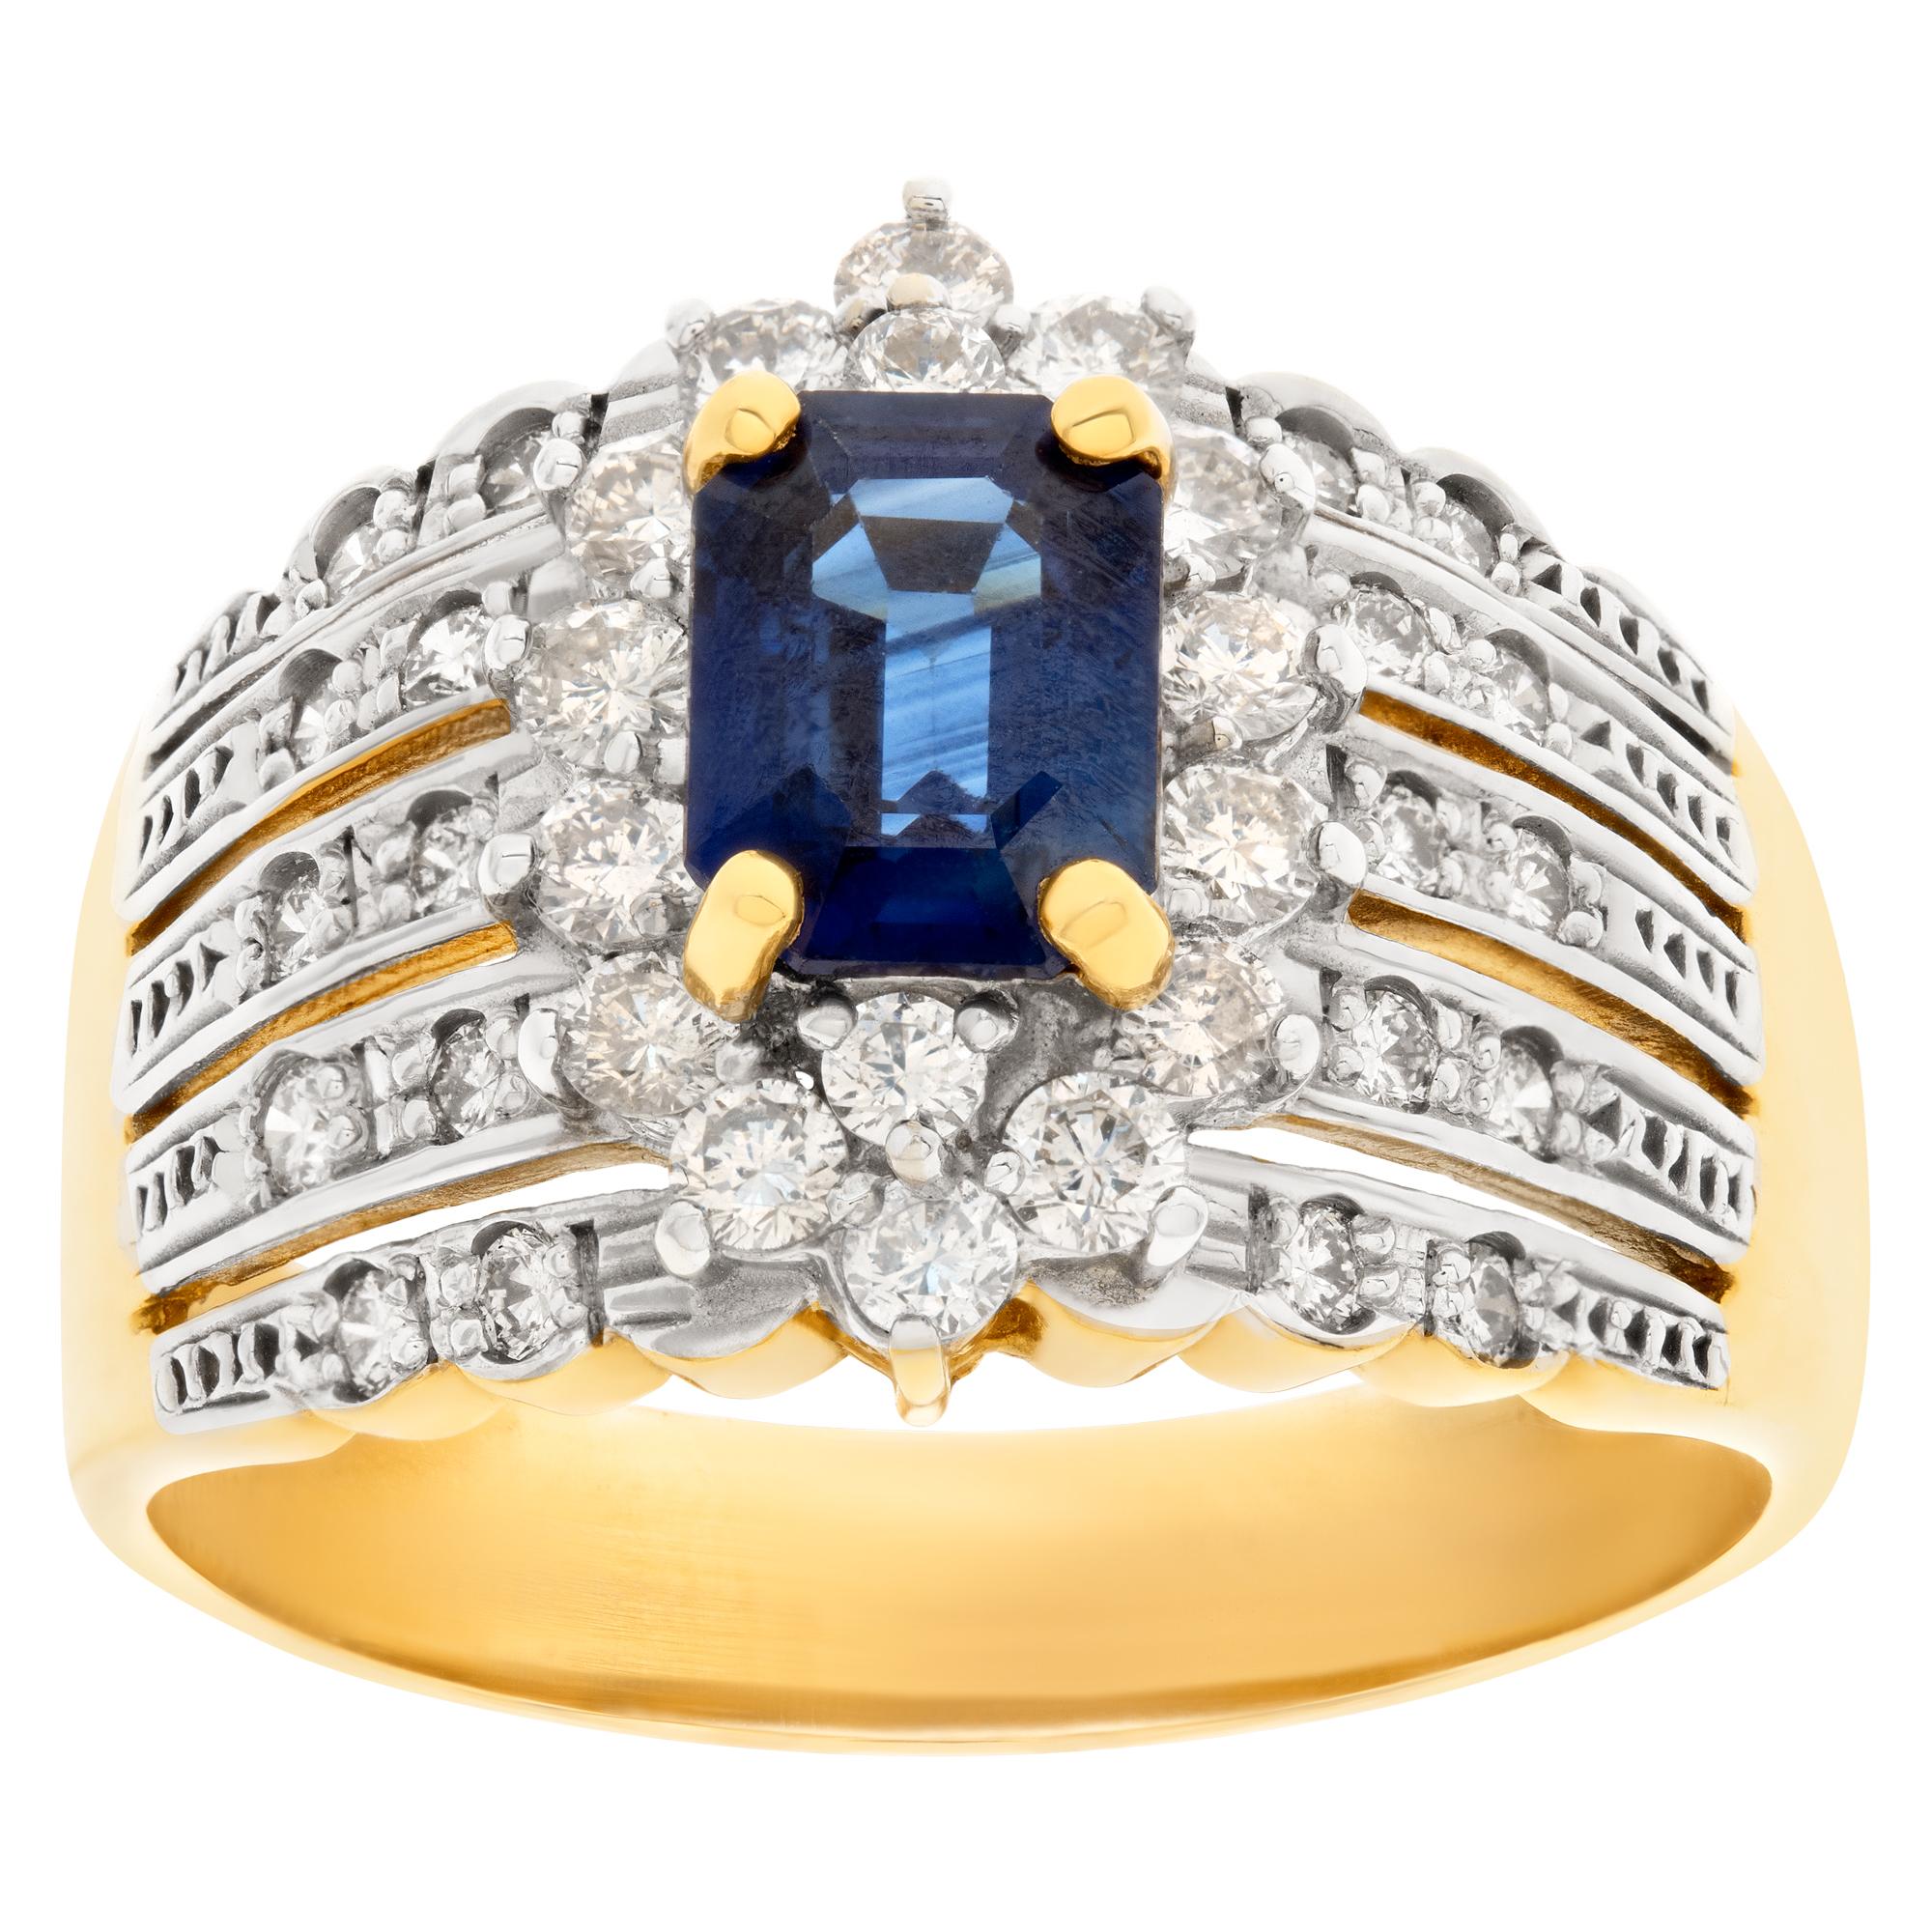 Sapphire & diamond ring in 18k yellow gold signed by LeVian with appoximately 2 carat Sapphire and approximately 1 carat in G-H color, VS clarity diamonds. Size 11This Diamond/Sapphires ring is currently size 11 and some items can be sized up or